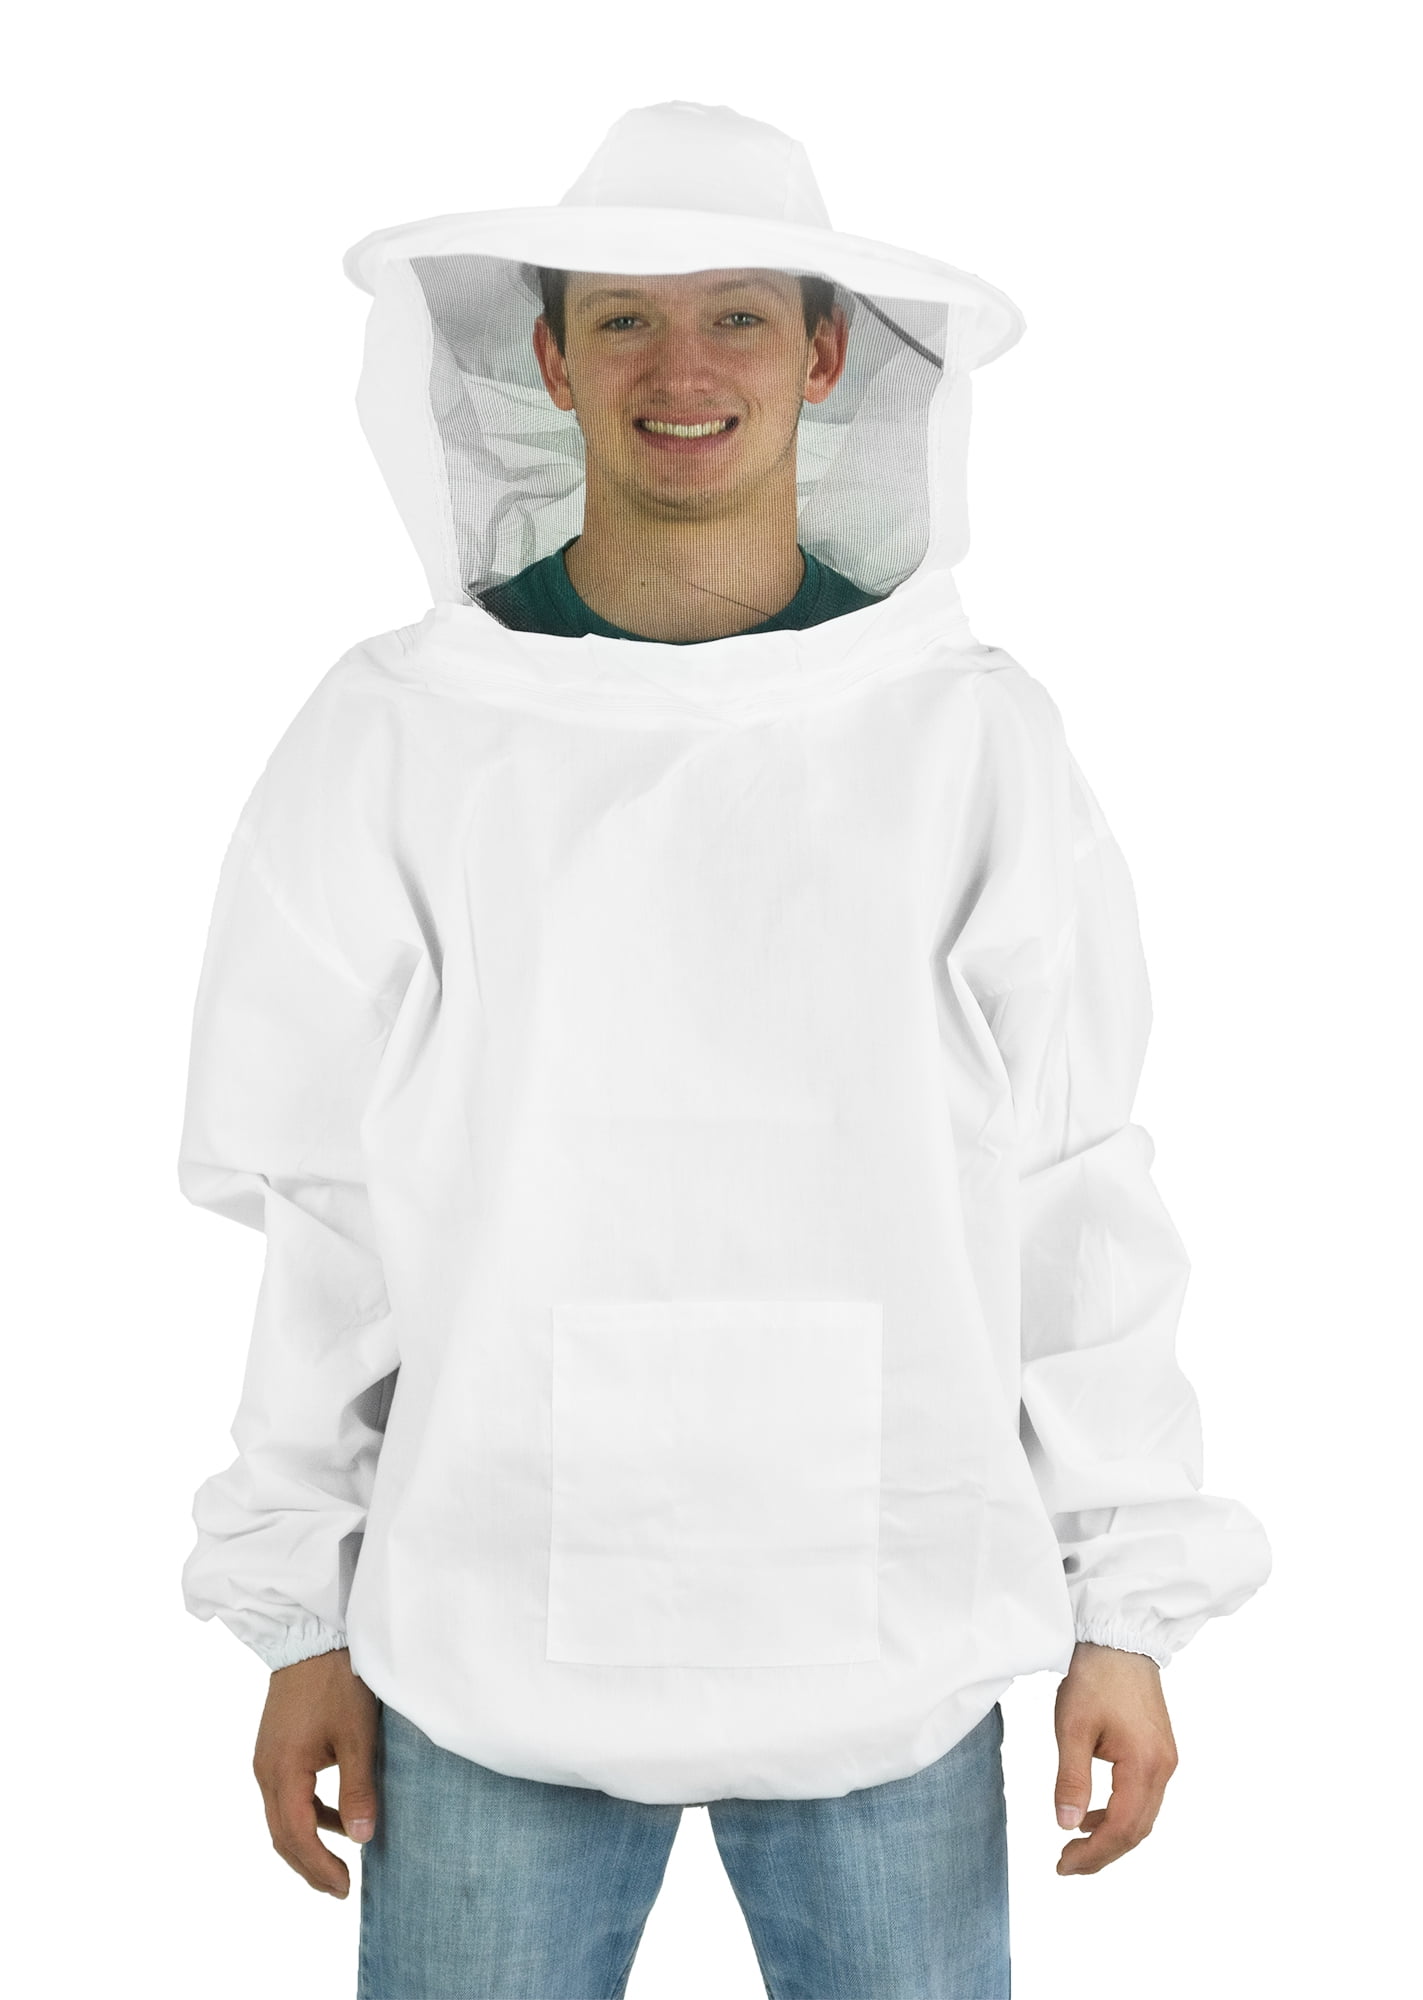 Beekeeping Jacket Equipment Veil Bee Keeping Cotton Suit Hat Pull Over Smock USA 